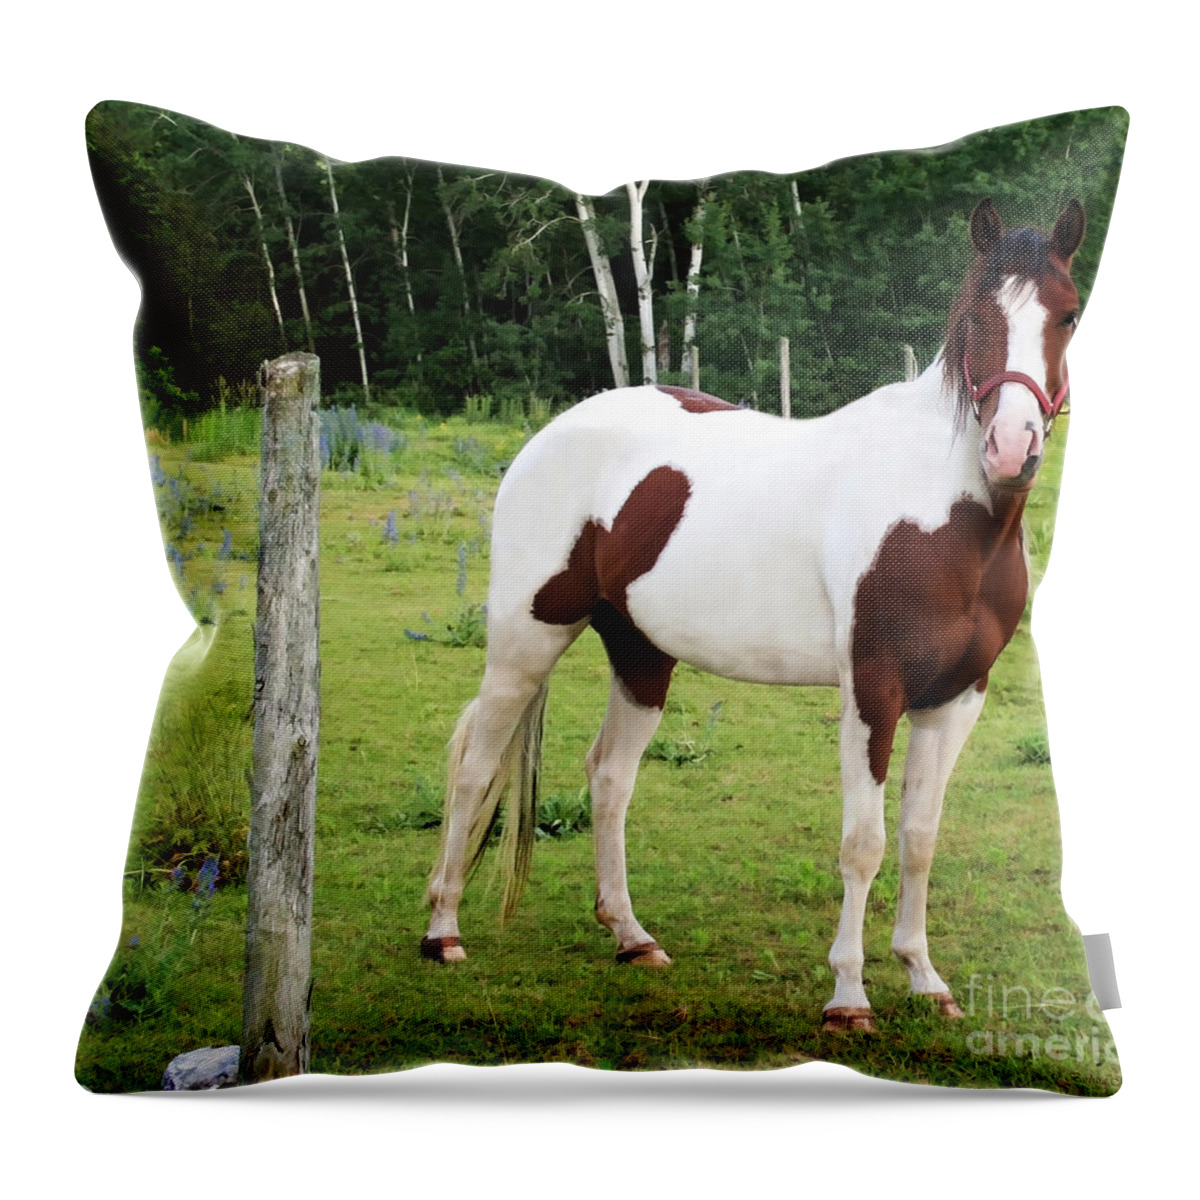 Pony Throw Pillow featuring the photograph Painted Pony by Barbara McMahon